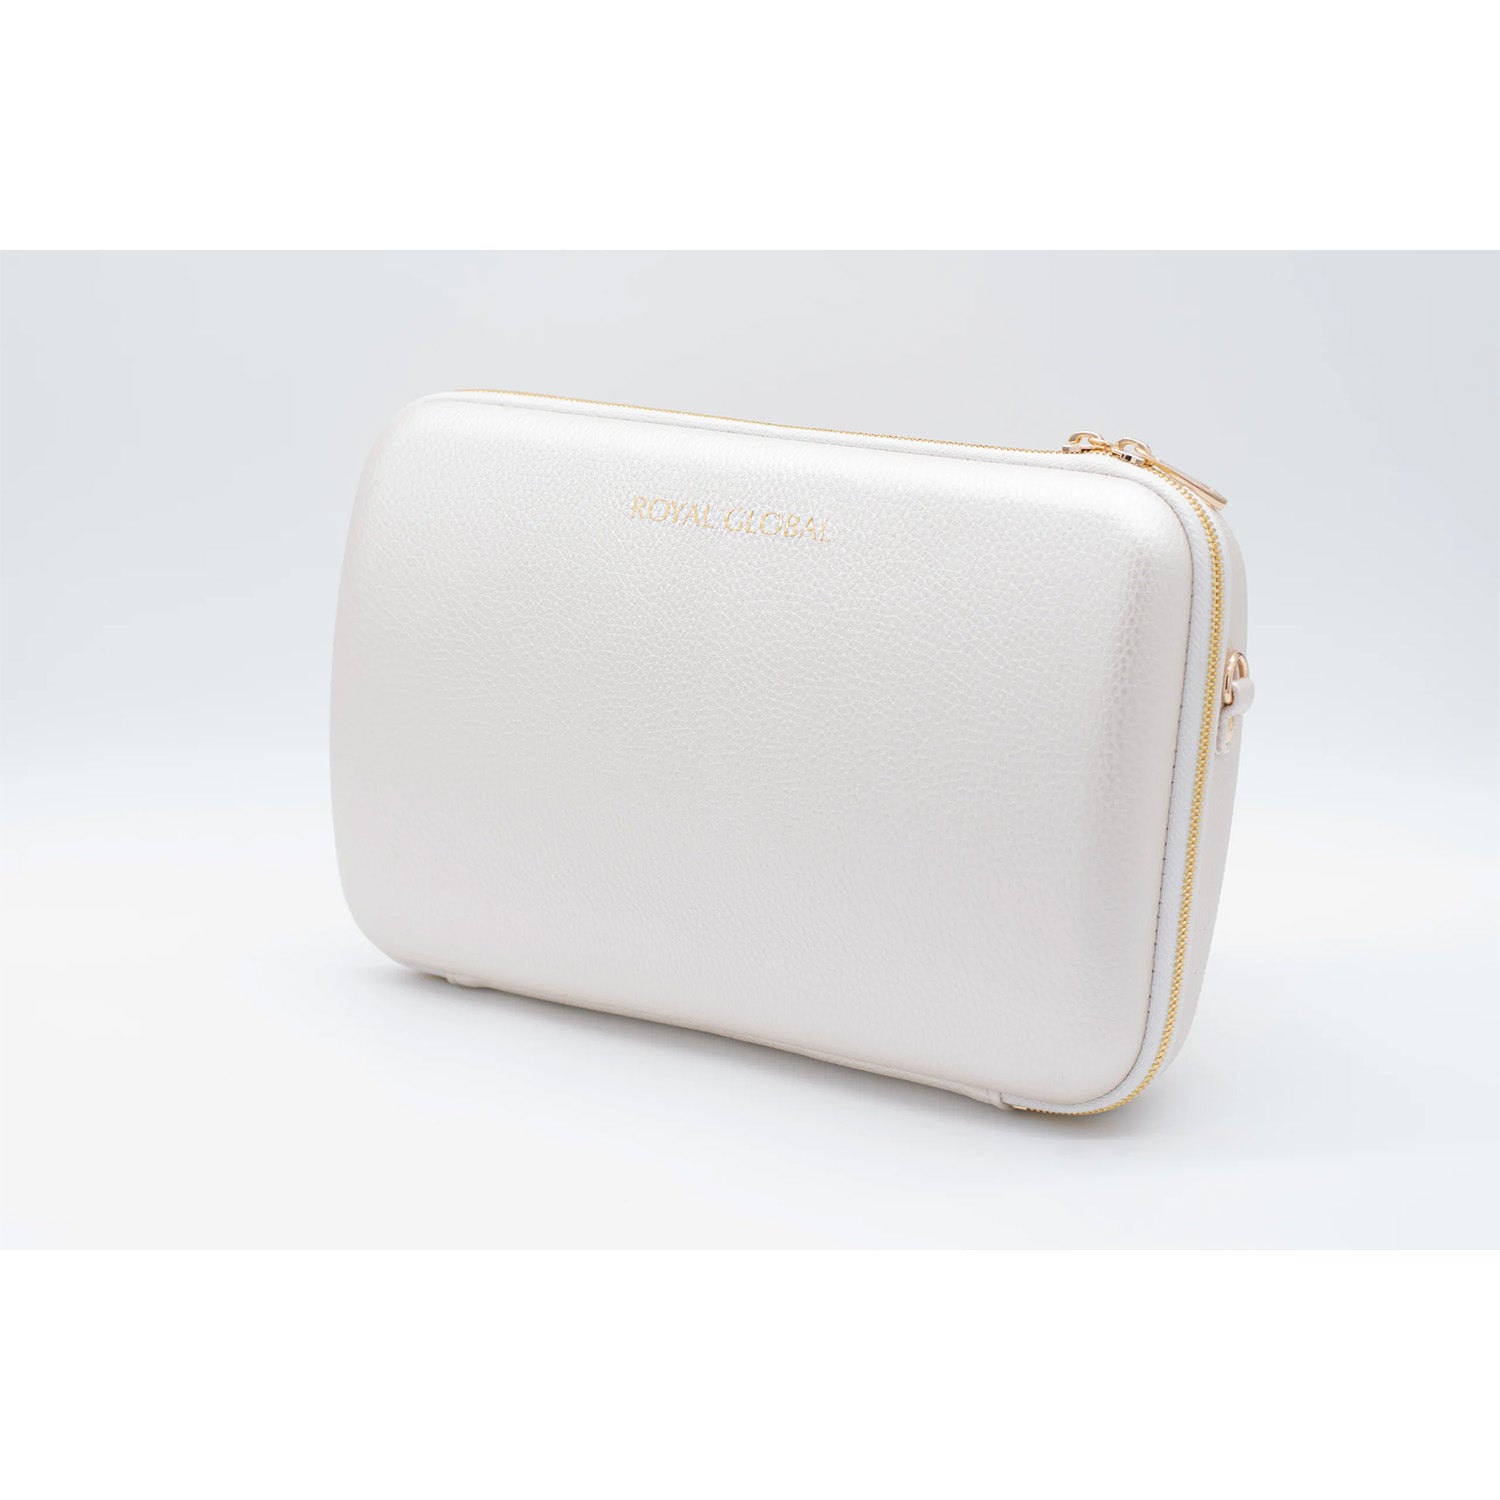 White Royal Global clarinet case with gold-colored hardware, against a white background